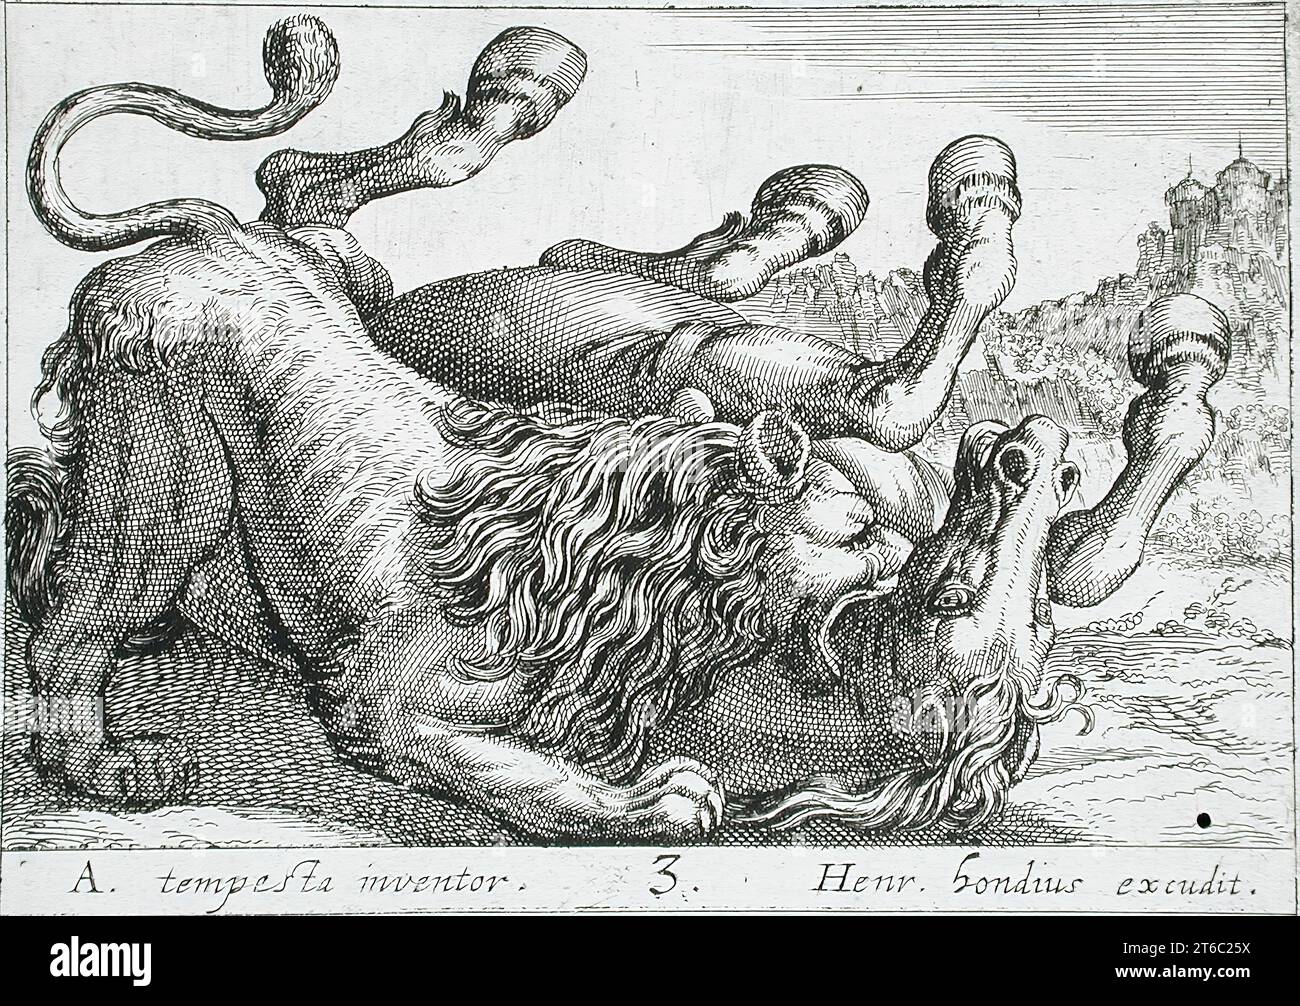 A Lion Biting a Horse's Neck, 1610. From Battling Animals, pl. 3. Stock Photo